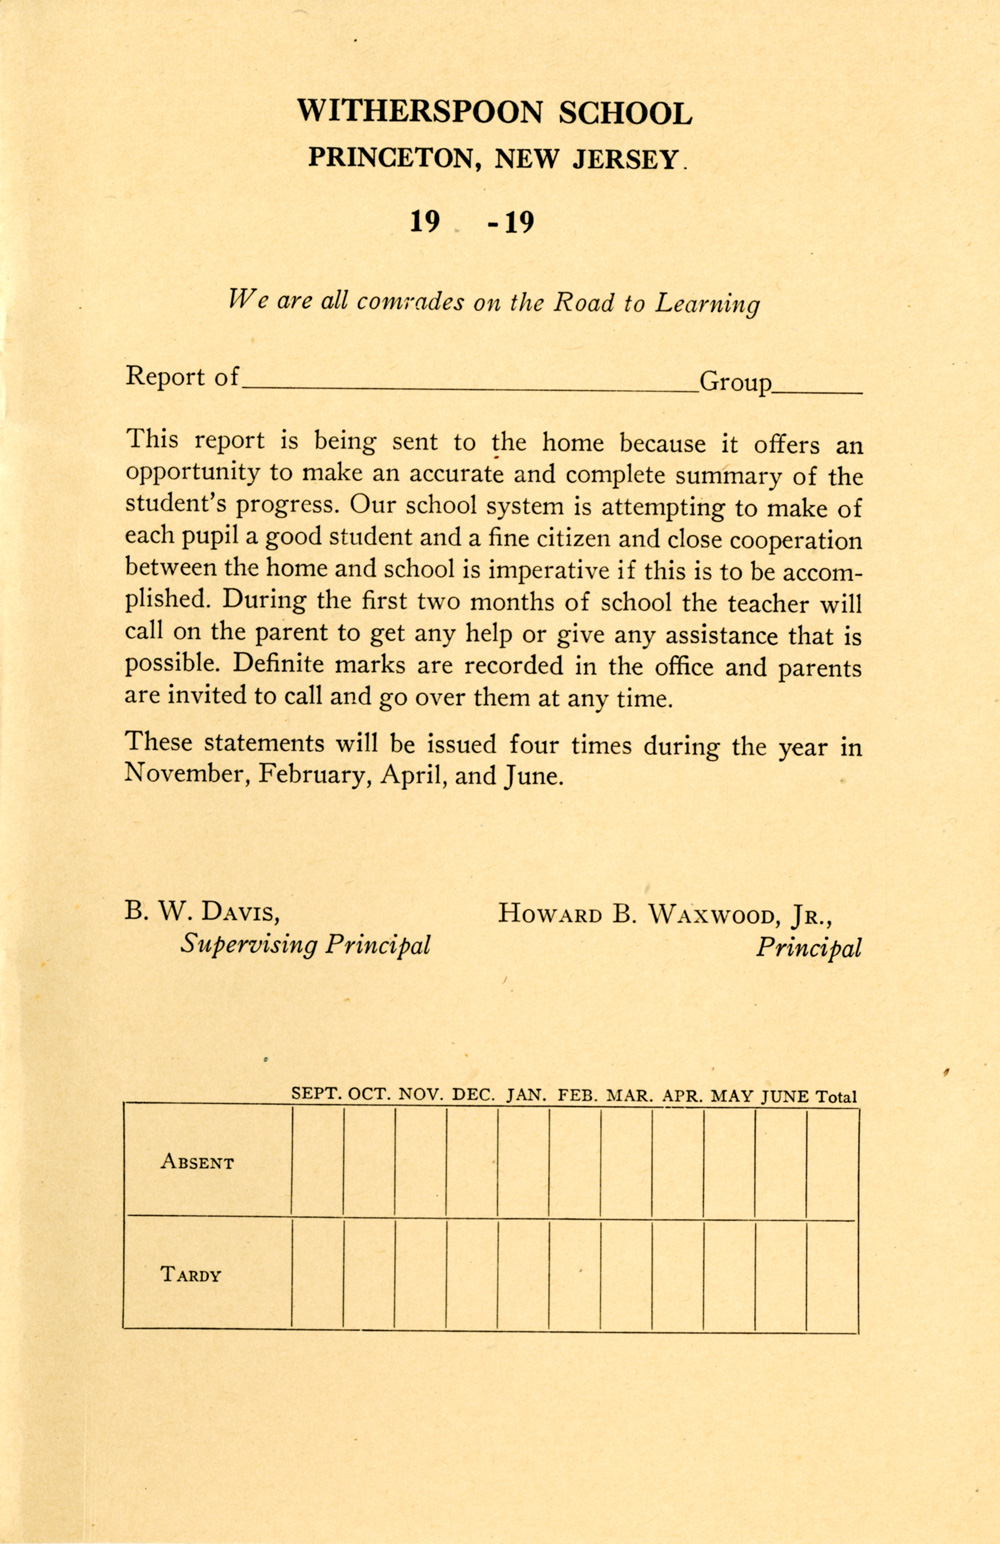 Witherspoon School for Colored Children report card, 1938. Historical Society of Princeton